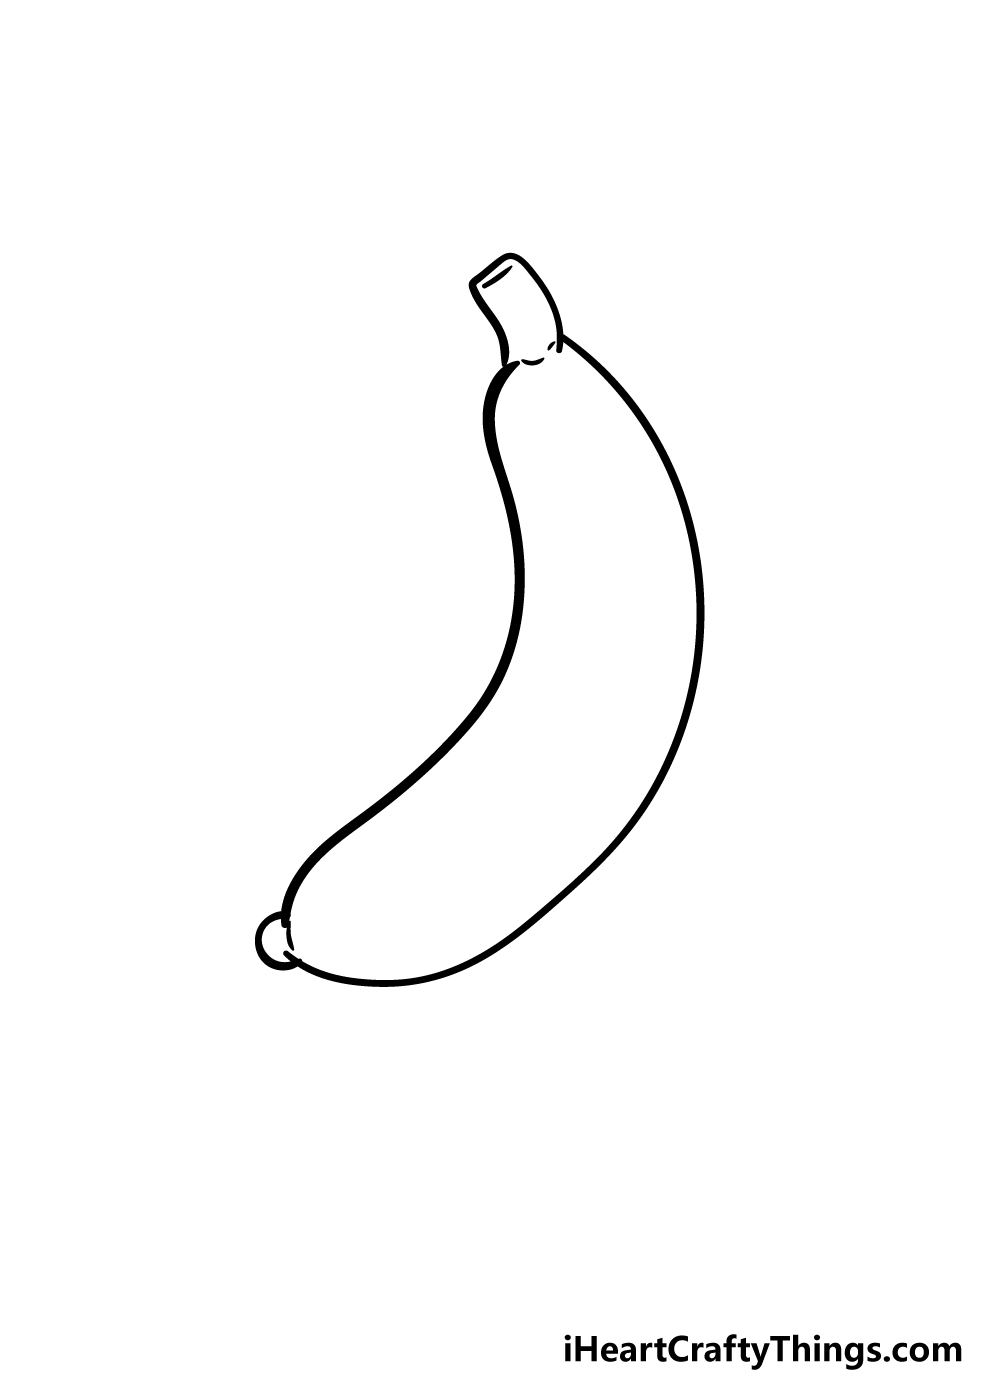 How to Draw a Banana  Easy Drawing Tutorial For Kids